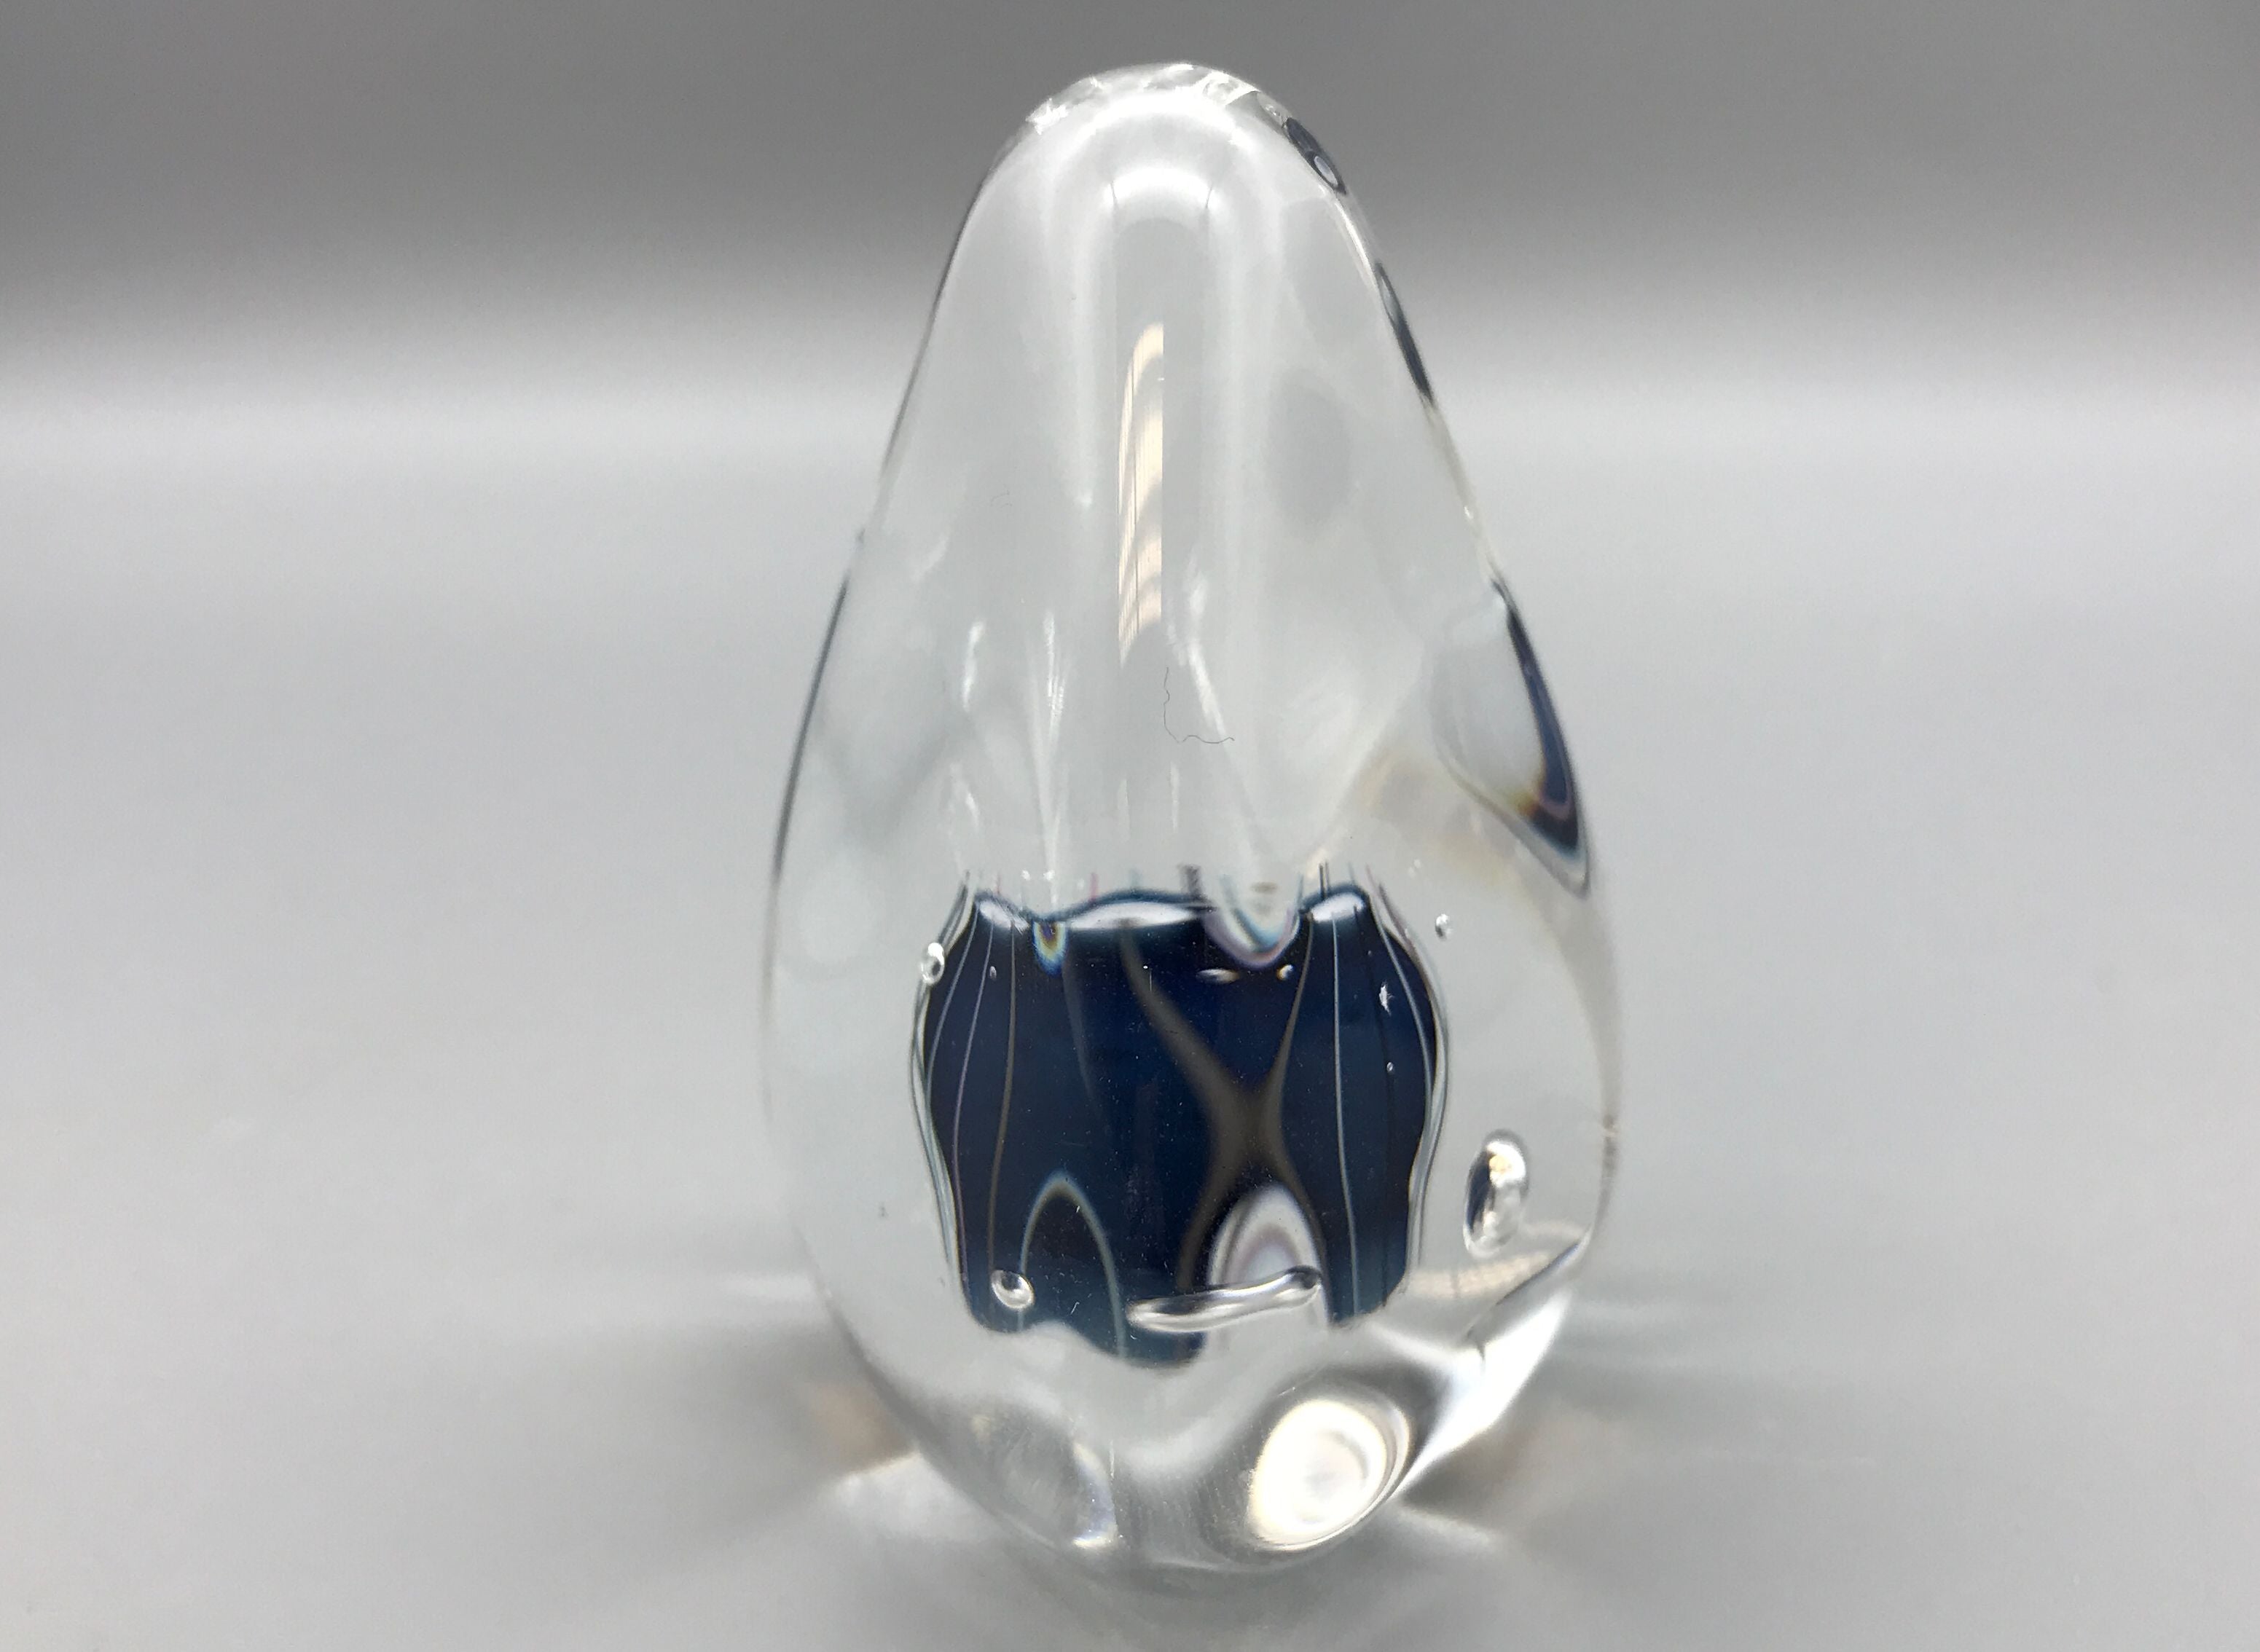 Small Transparent Crystal Pyramid Shaped Paper Weight- 2.5 inches tall